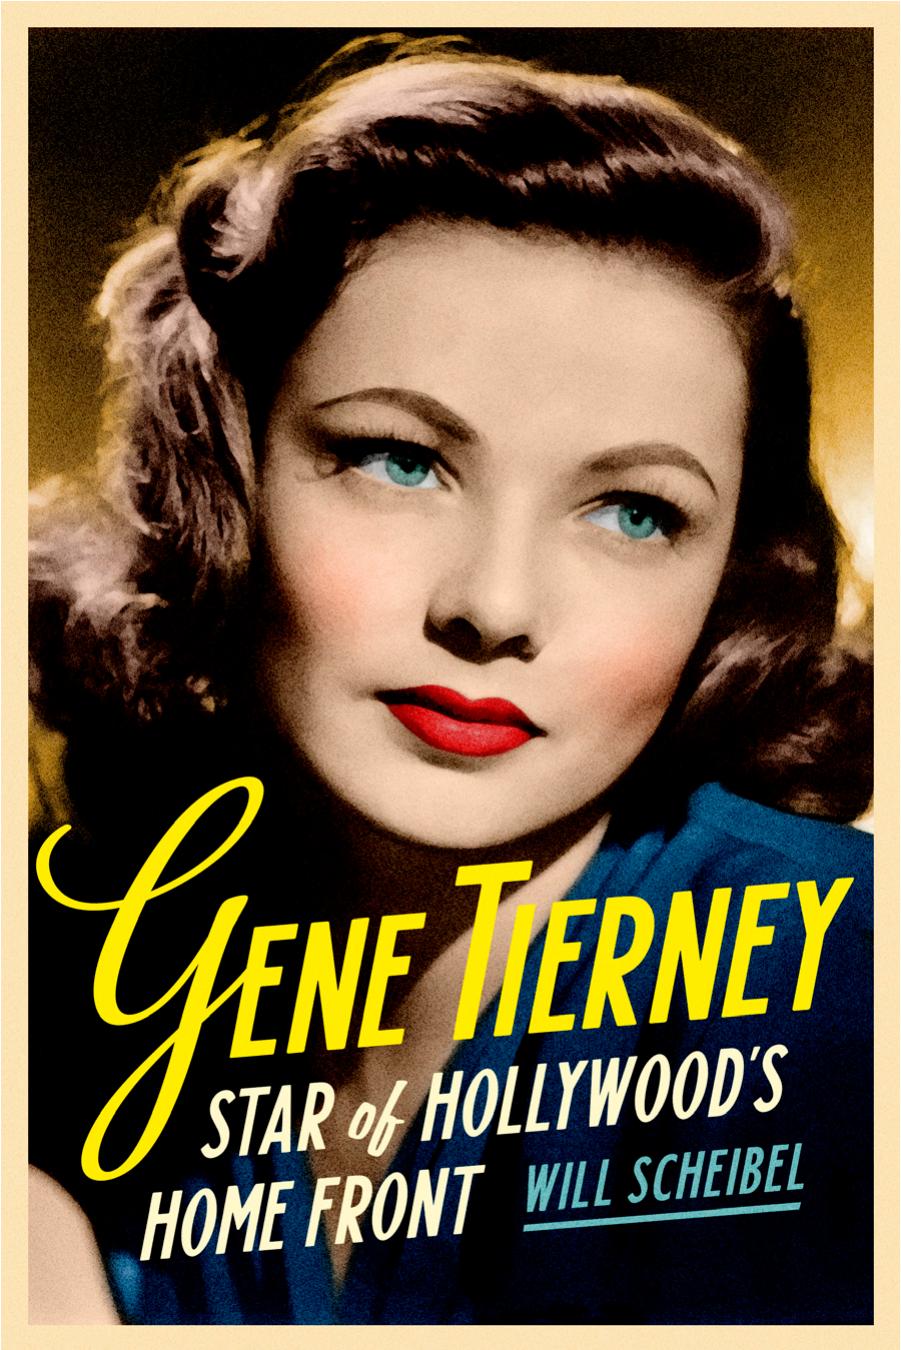 Gene Tierney: Star of Hollywood's Home Front by Will Scheibel